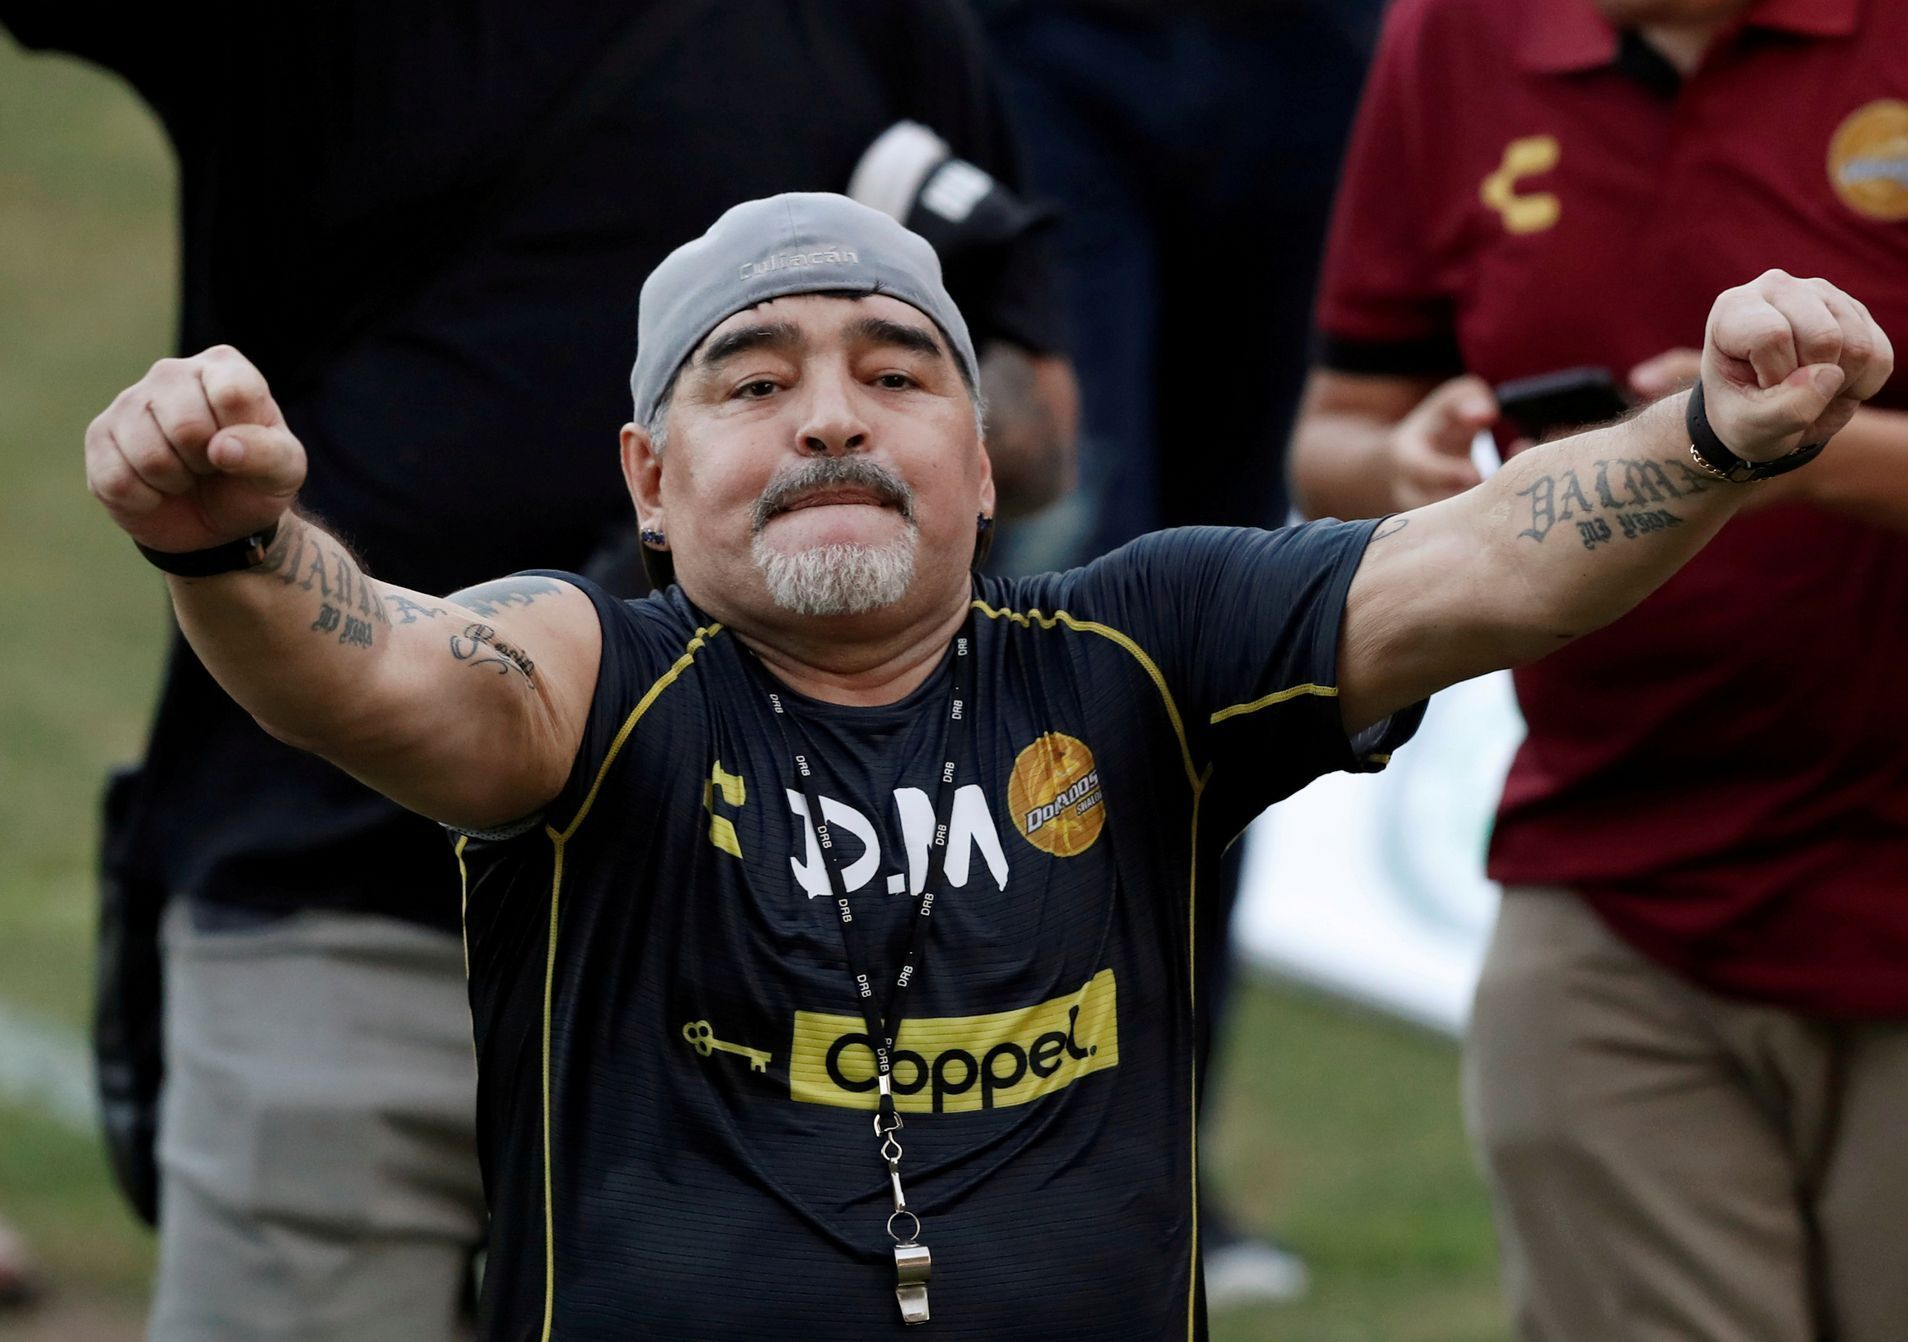 FILE PHOTO: Argentinian soccer legend Diego Armando Maradona reacts to fans during his first training session as coach of Dorados at the Banorte stadium in Culiacan, in the Mexican state of Sinaloa